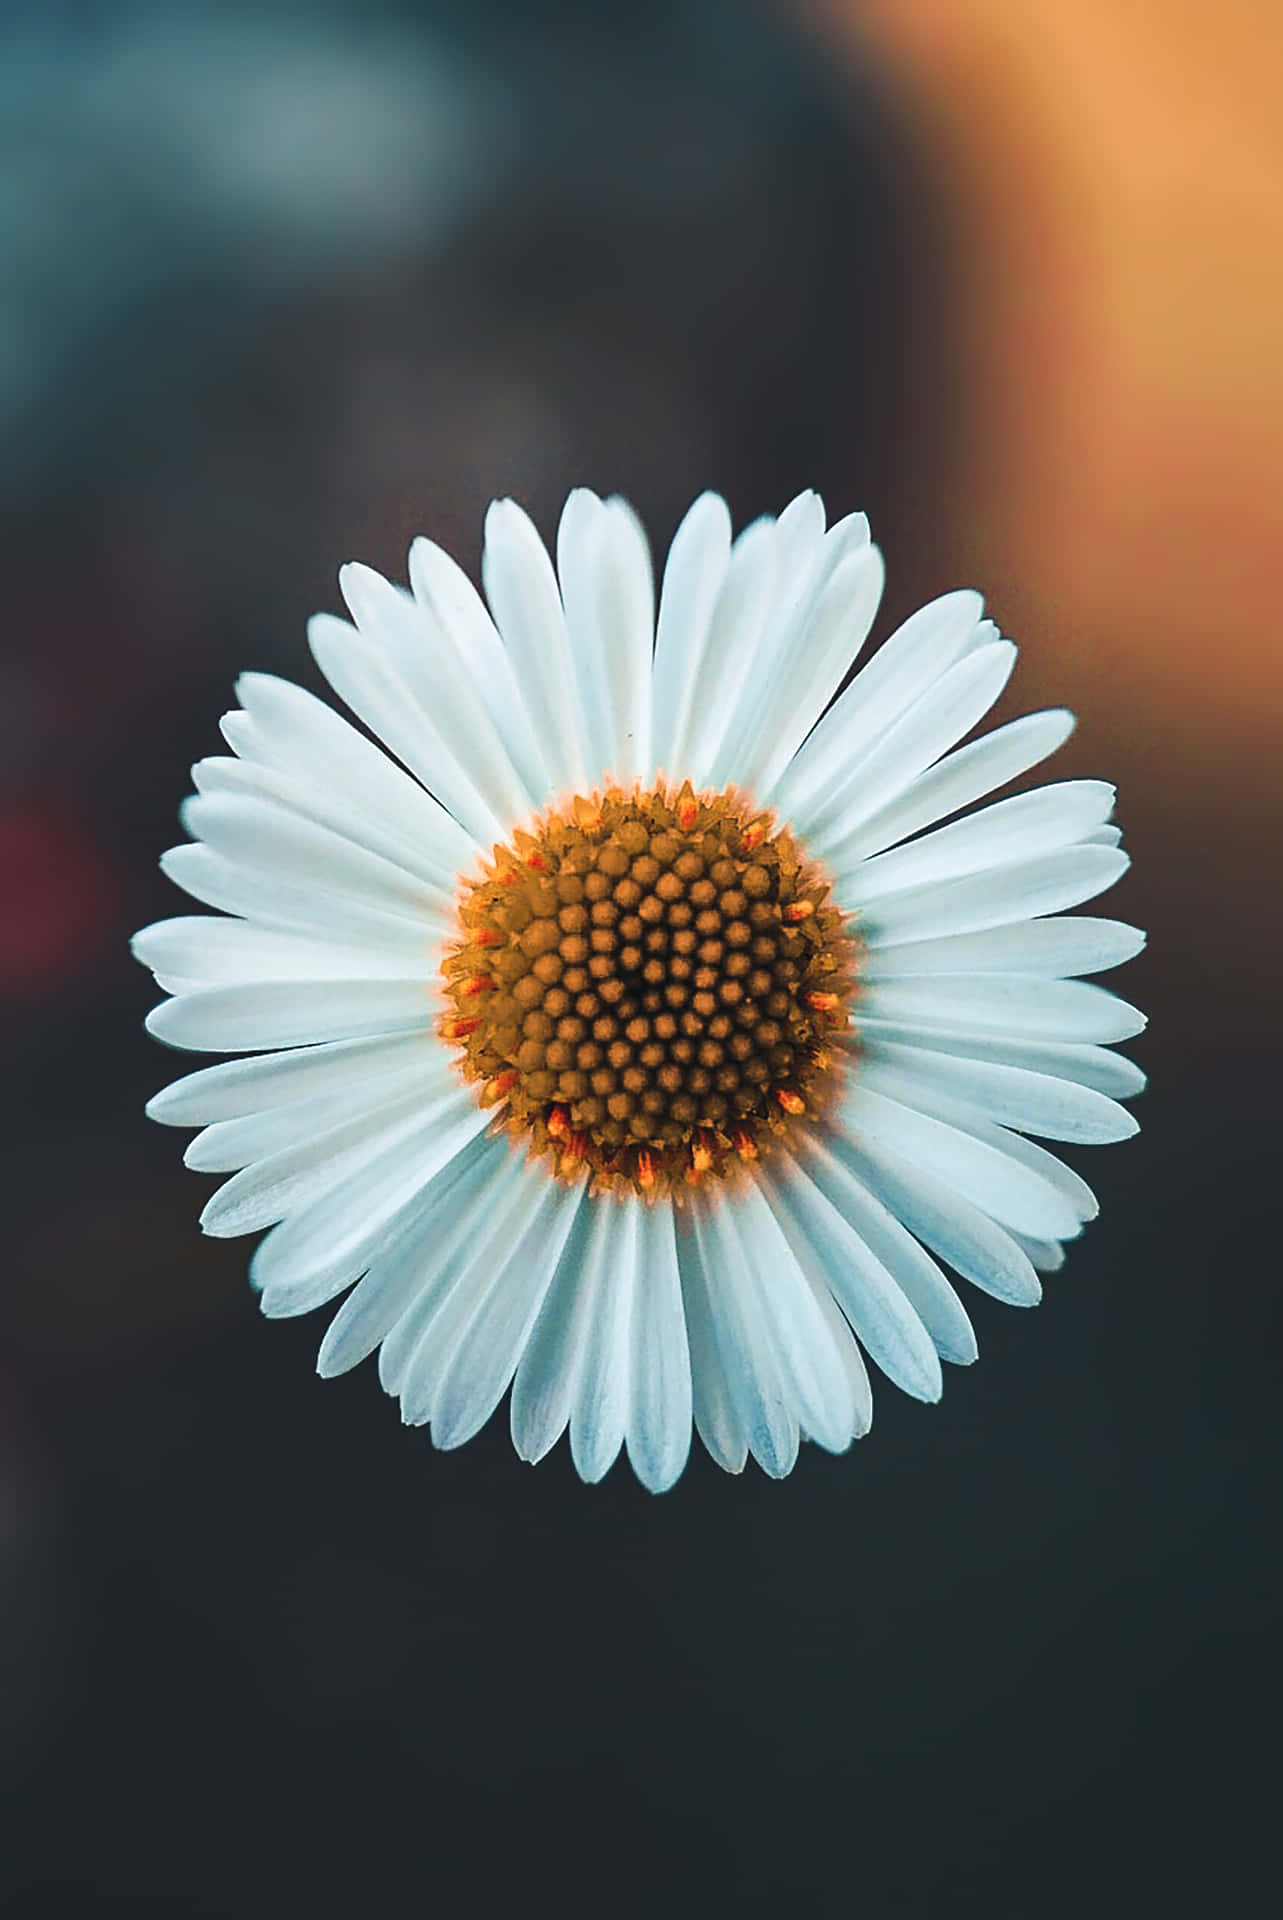 Bloom Of Youth - A Close-up View Of A Single Daisy Against An Ethereal Sky-like Background